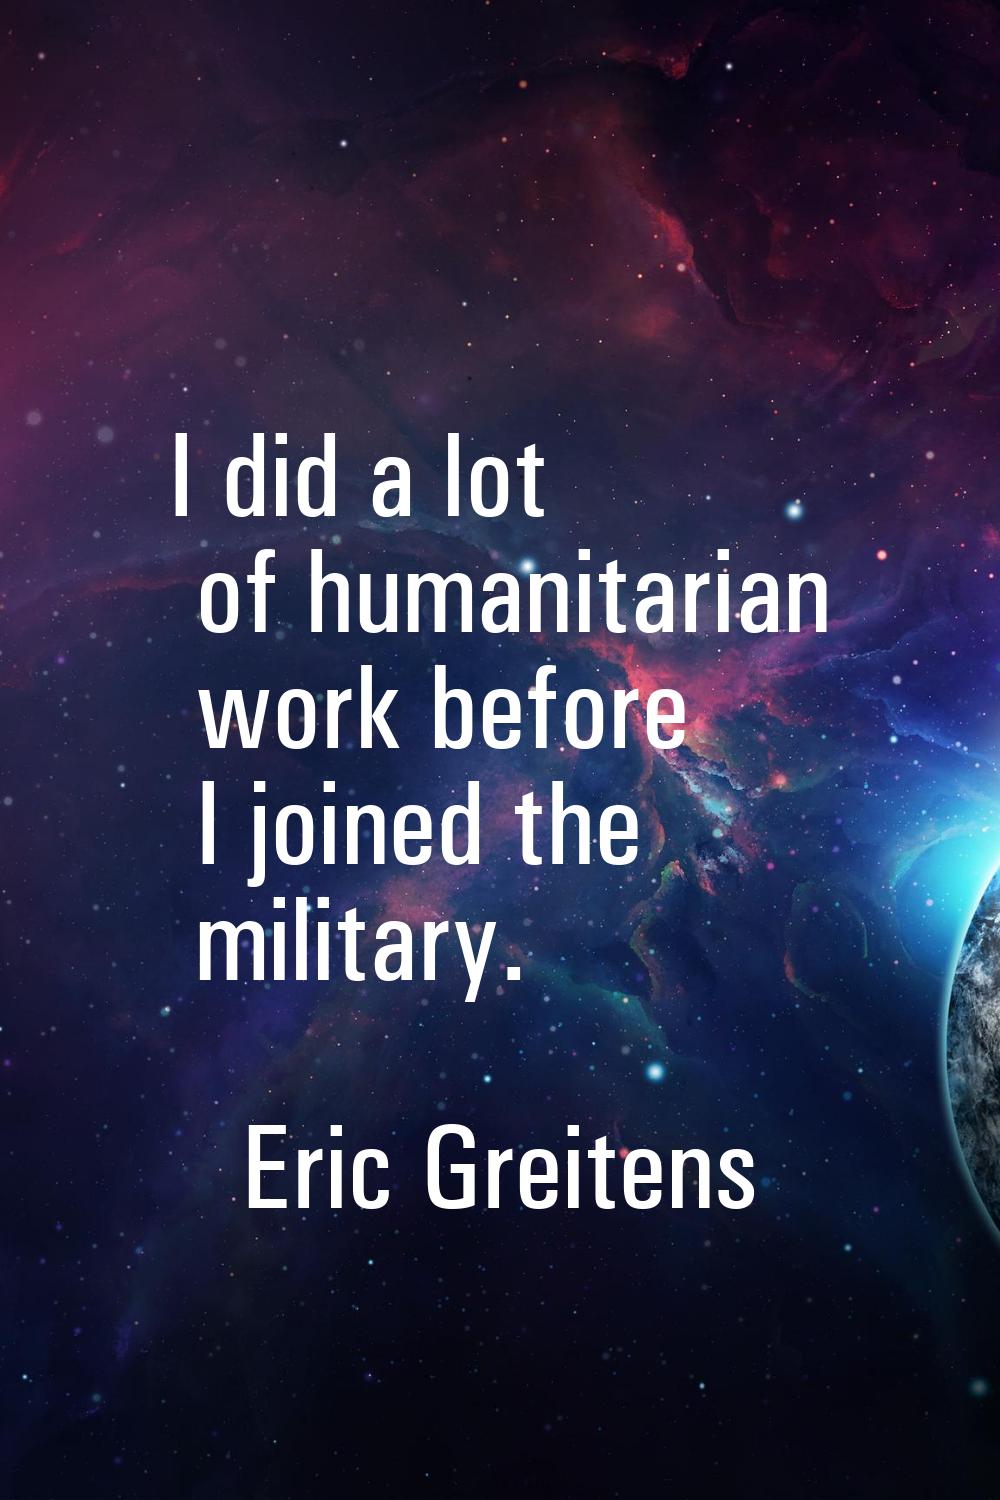 I did a lot of humanitarian work before I joined the military.